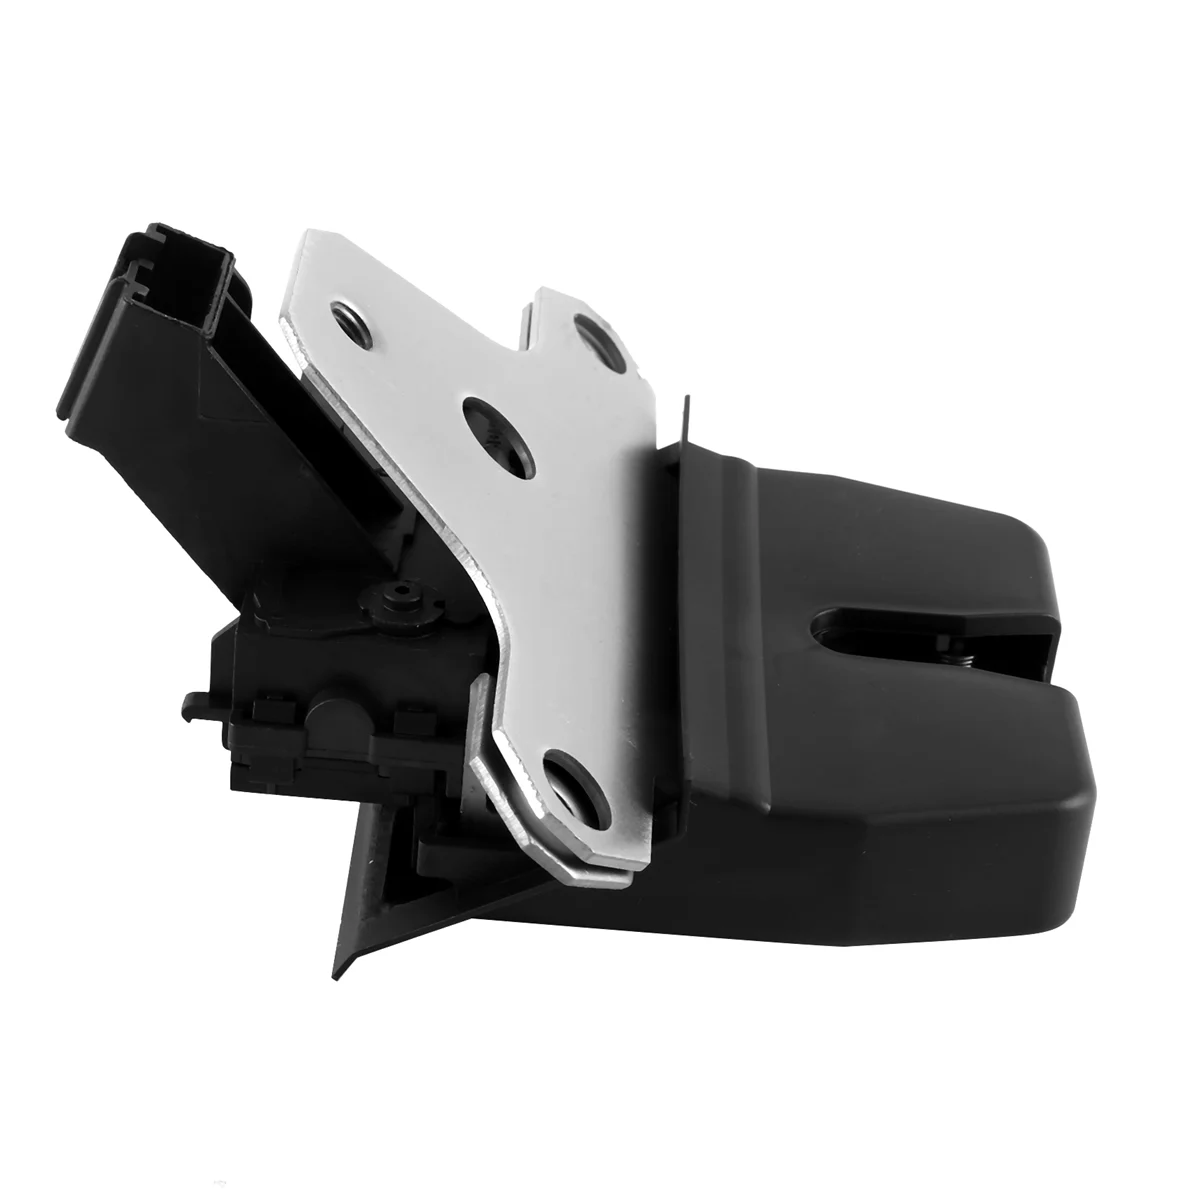 

Tailgate Latch Rear Tailgate Flap Trunk Lock for VOLVO S40 II V50 2004-2012 31335047,31335870,31335045